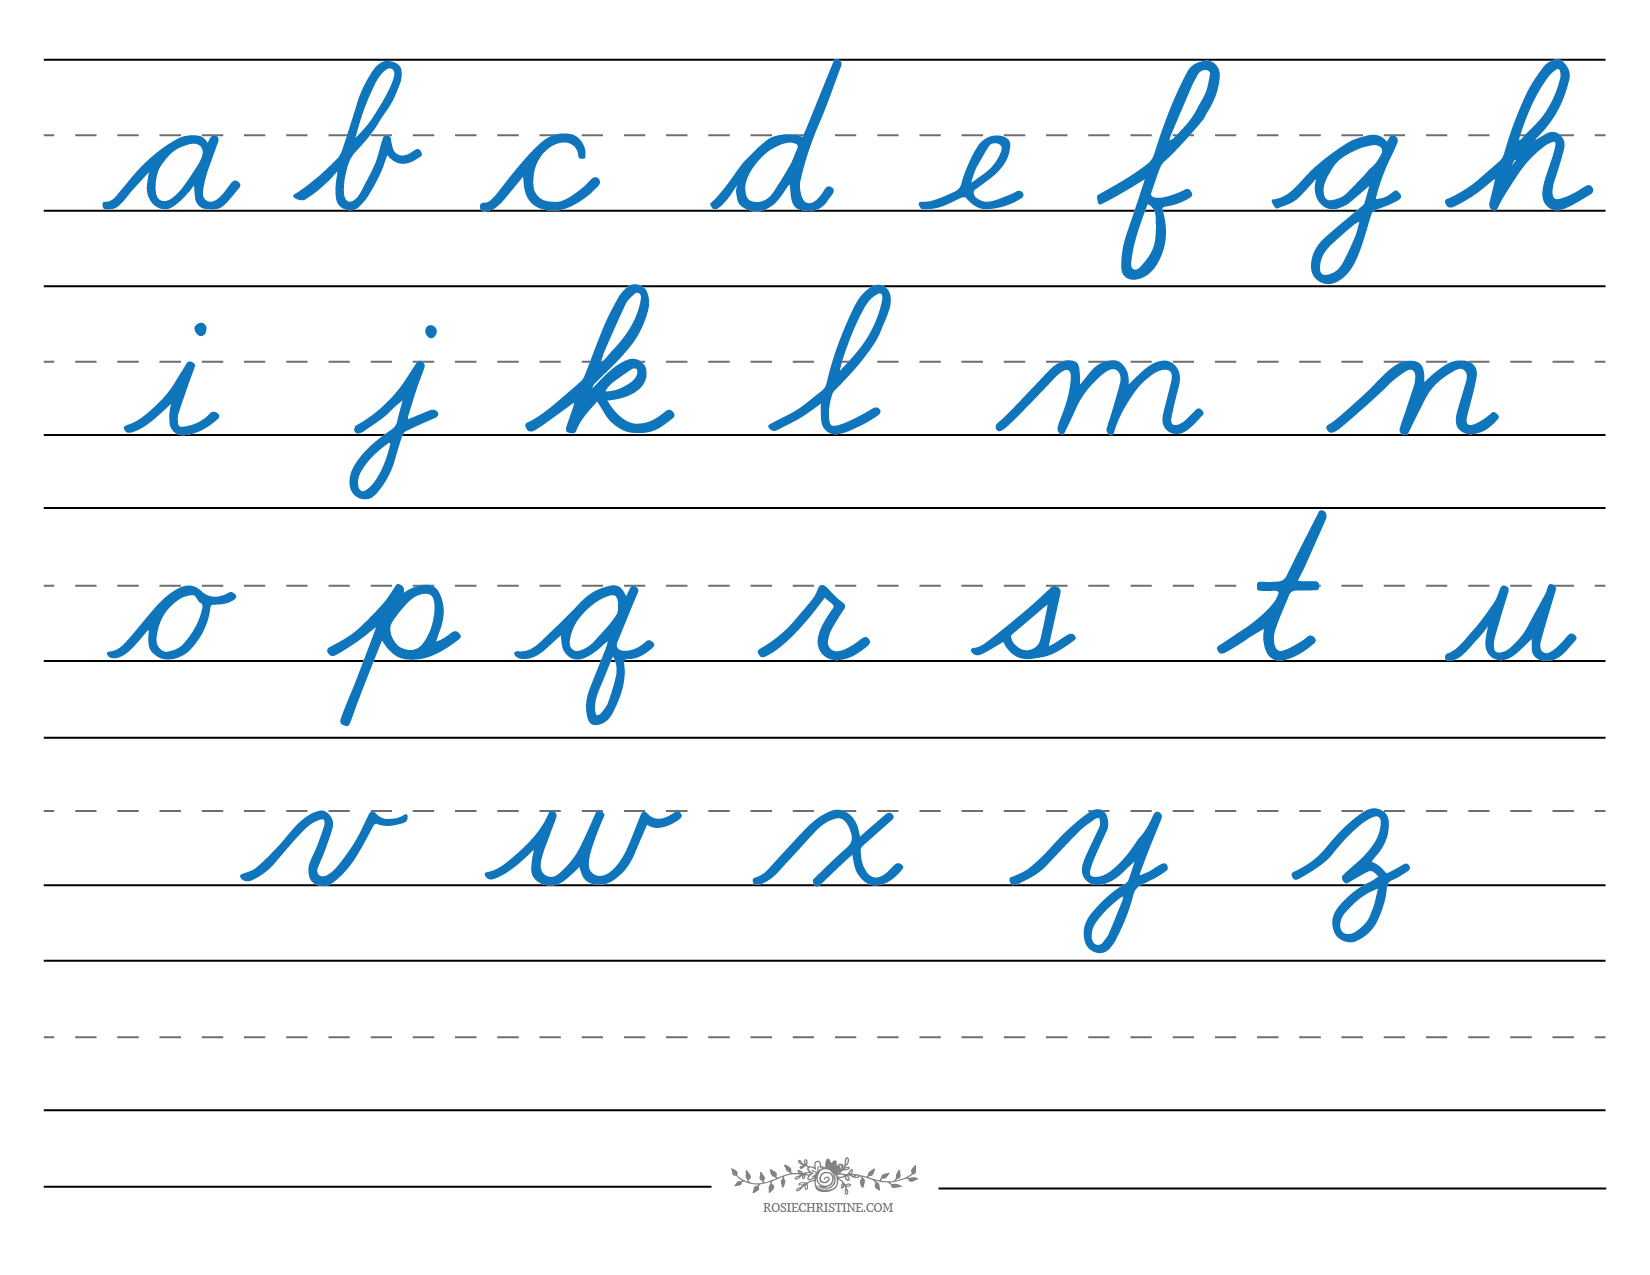 susanne-rosing-alphabet-in-cursive-lowercase-this-handy-poster-can